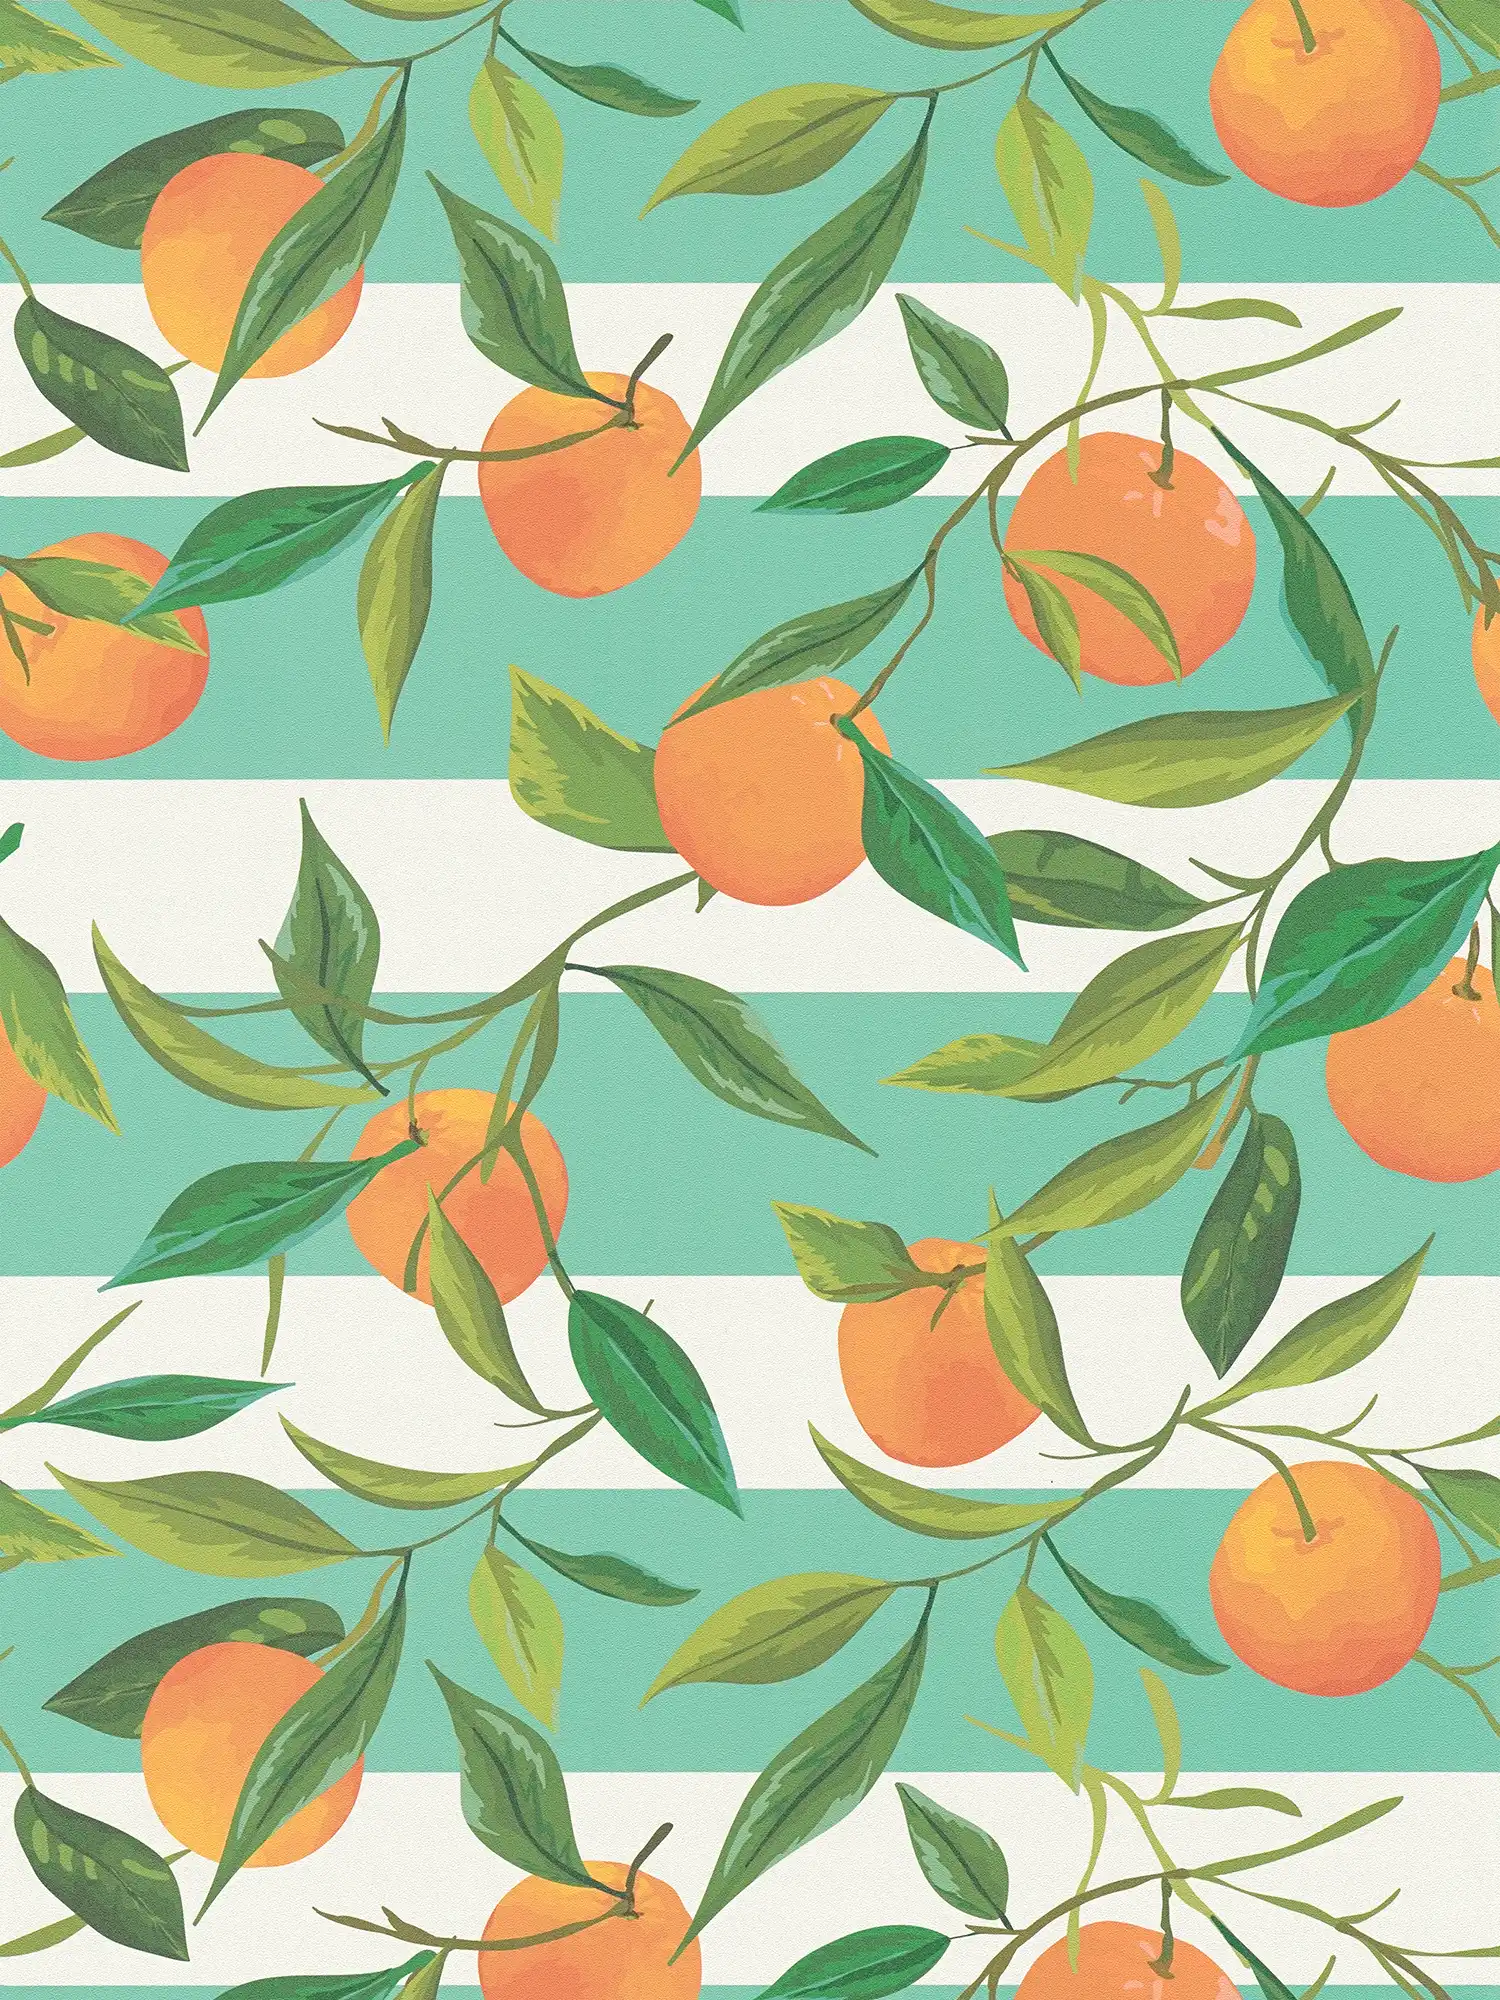         Striped non-woven wallpaper with painted oranges and leaves - turquoise, orange, green
    